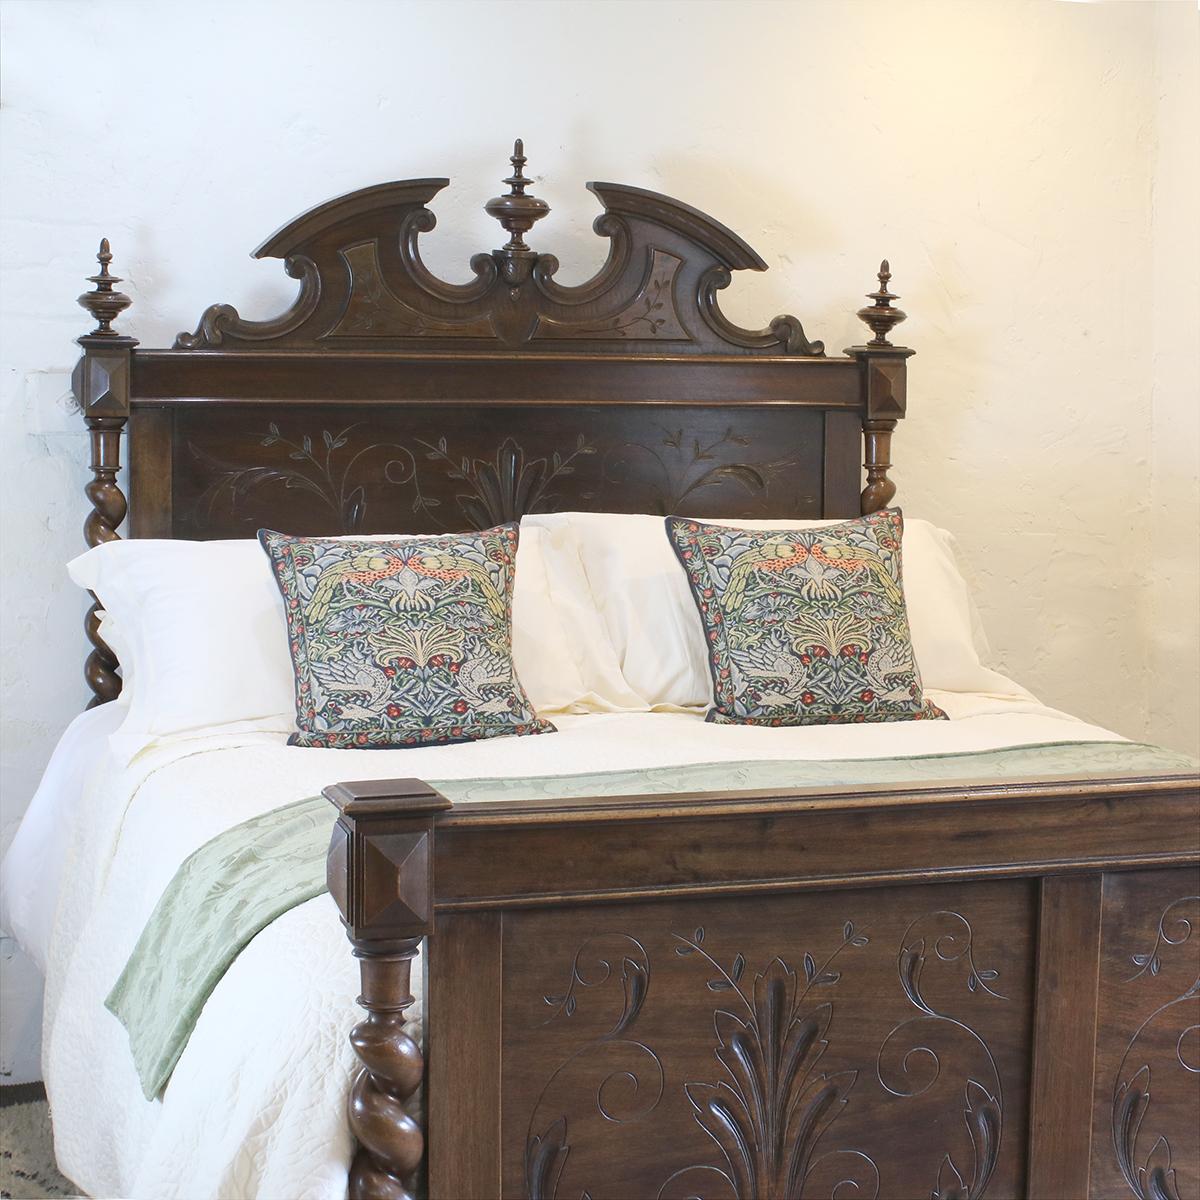 A superb Renaissance style bed in walnut with carved panels, barley twist columns, decorative pediment and turned finials. 

This bed accepts a British King size or American Queen size 5ft wide (60 inches or 150cm) base and mattress set.

The